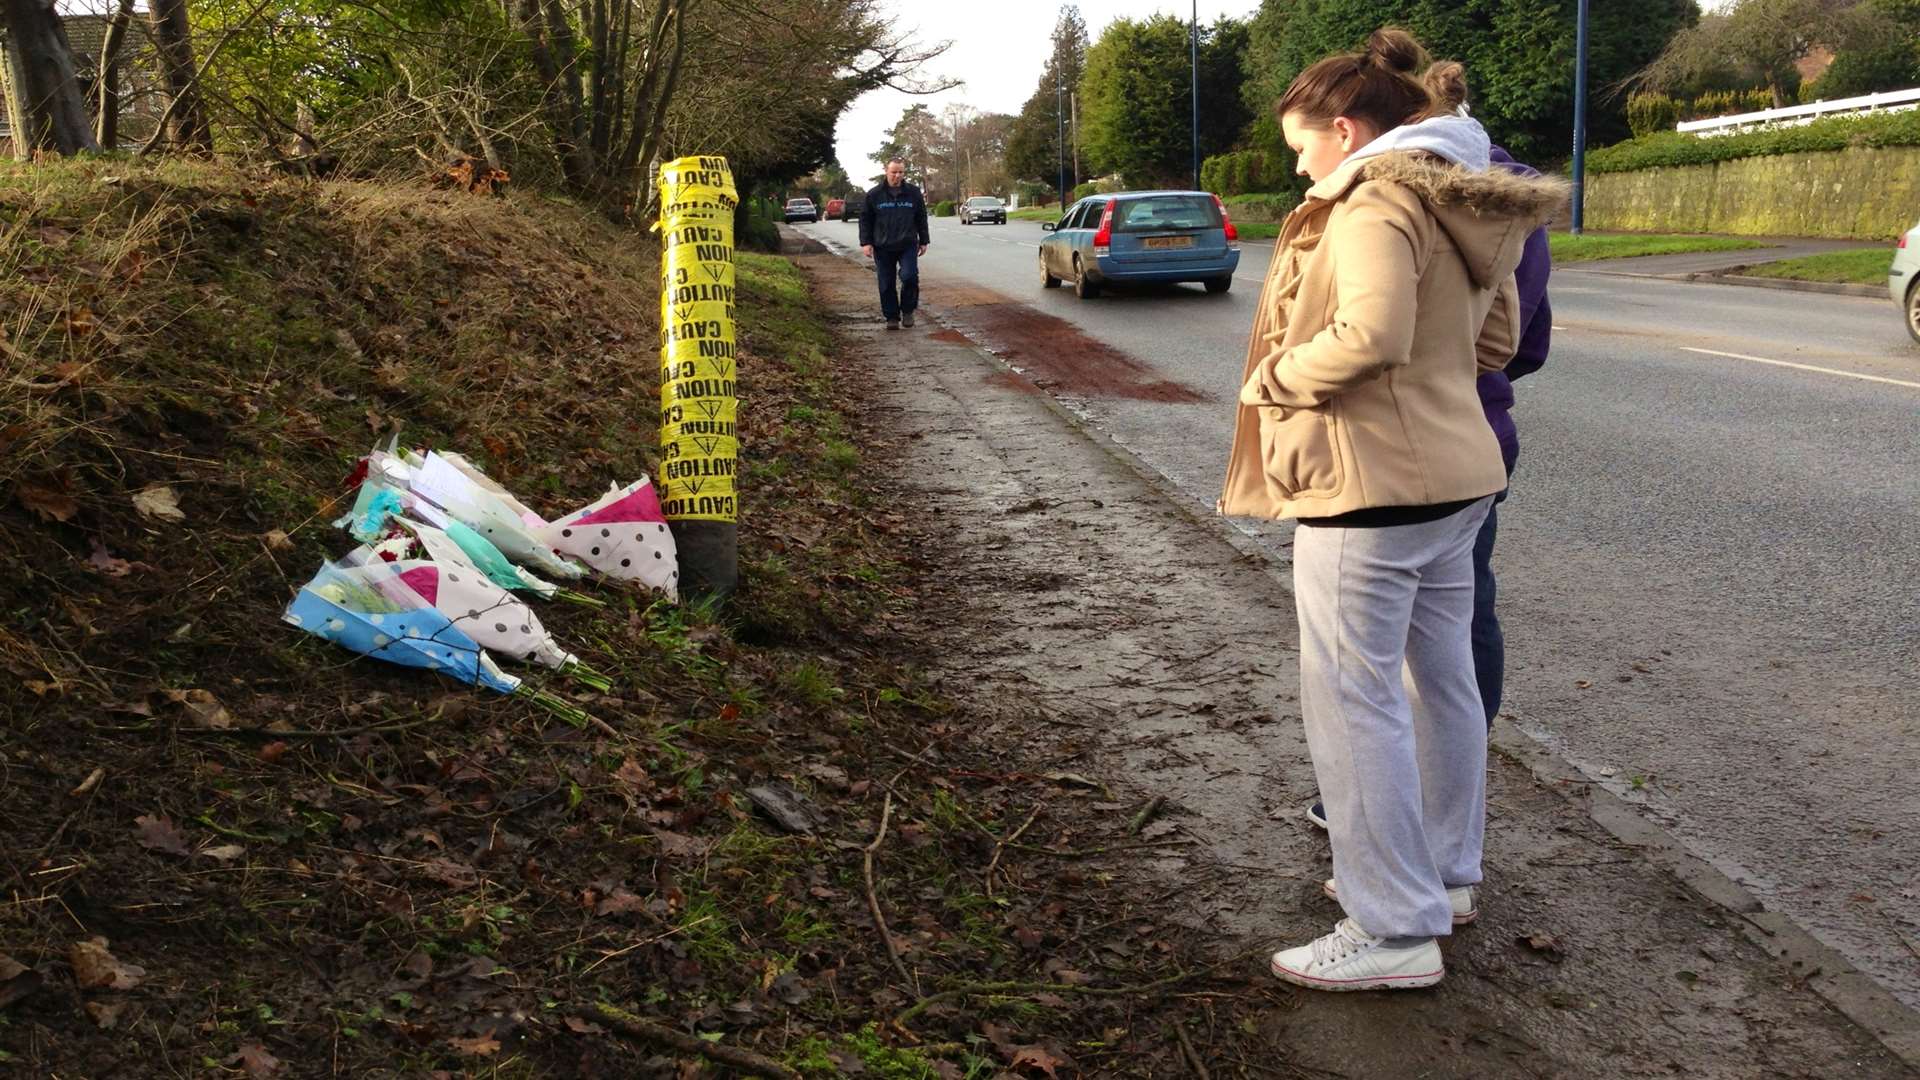 Friends pay their respects at the scene of the fatal road crash in Bearsted.